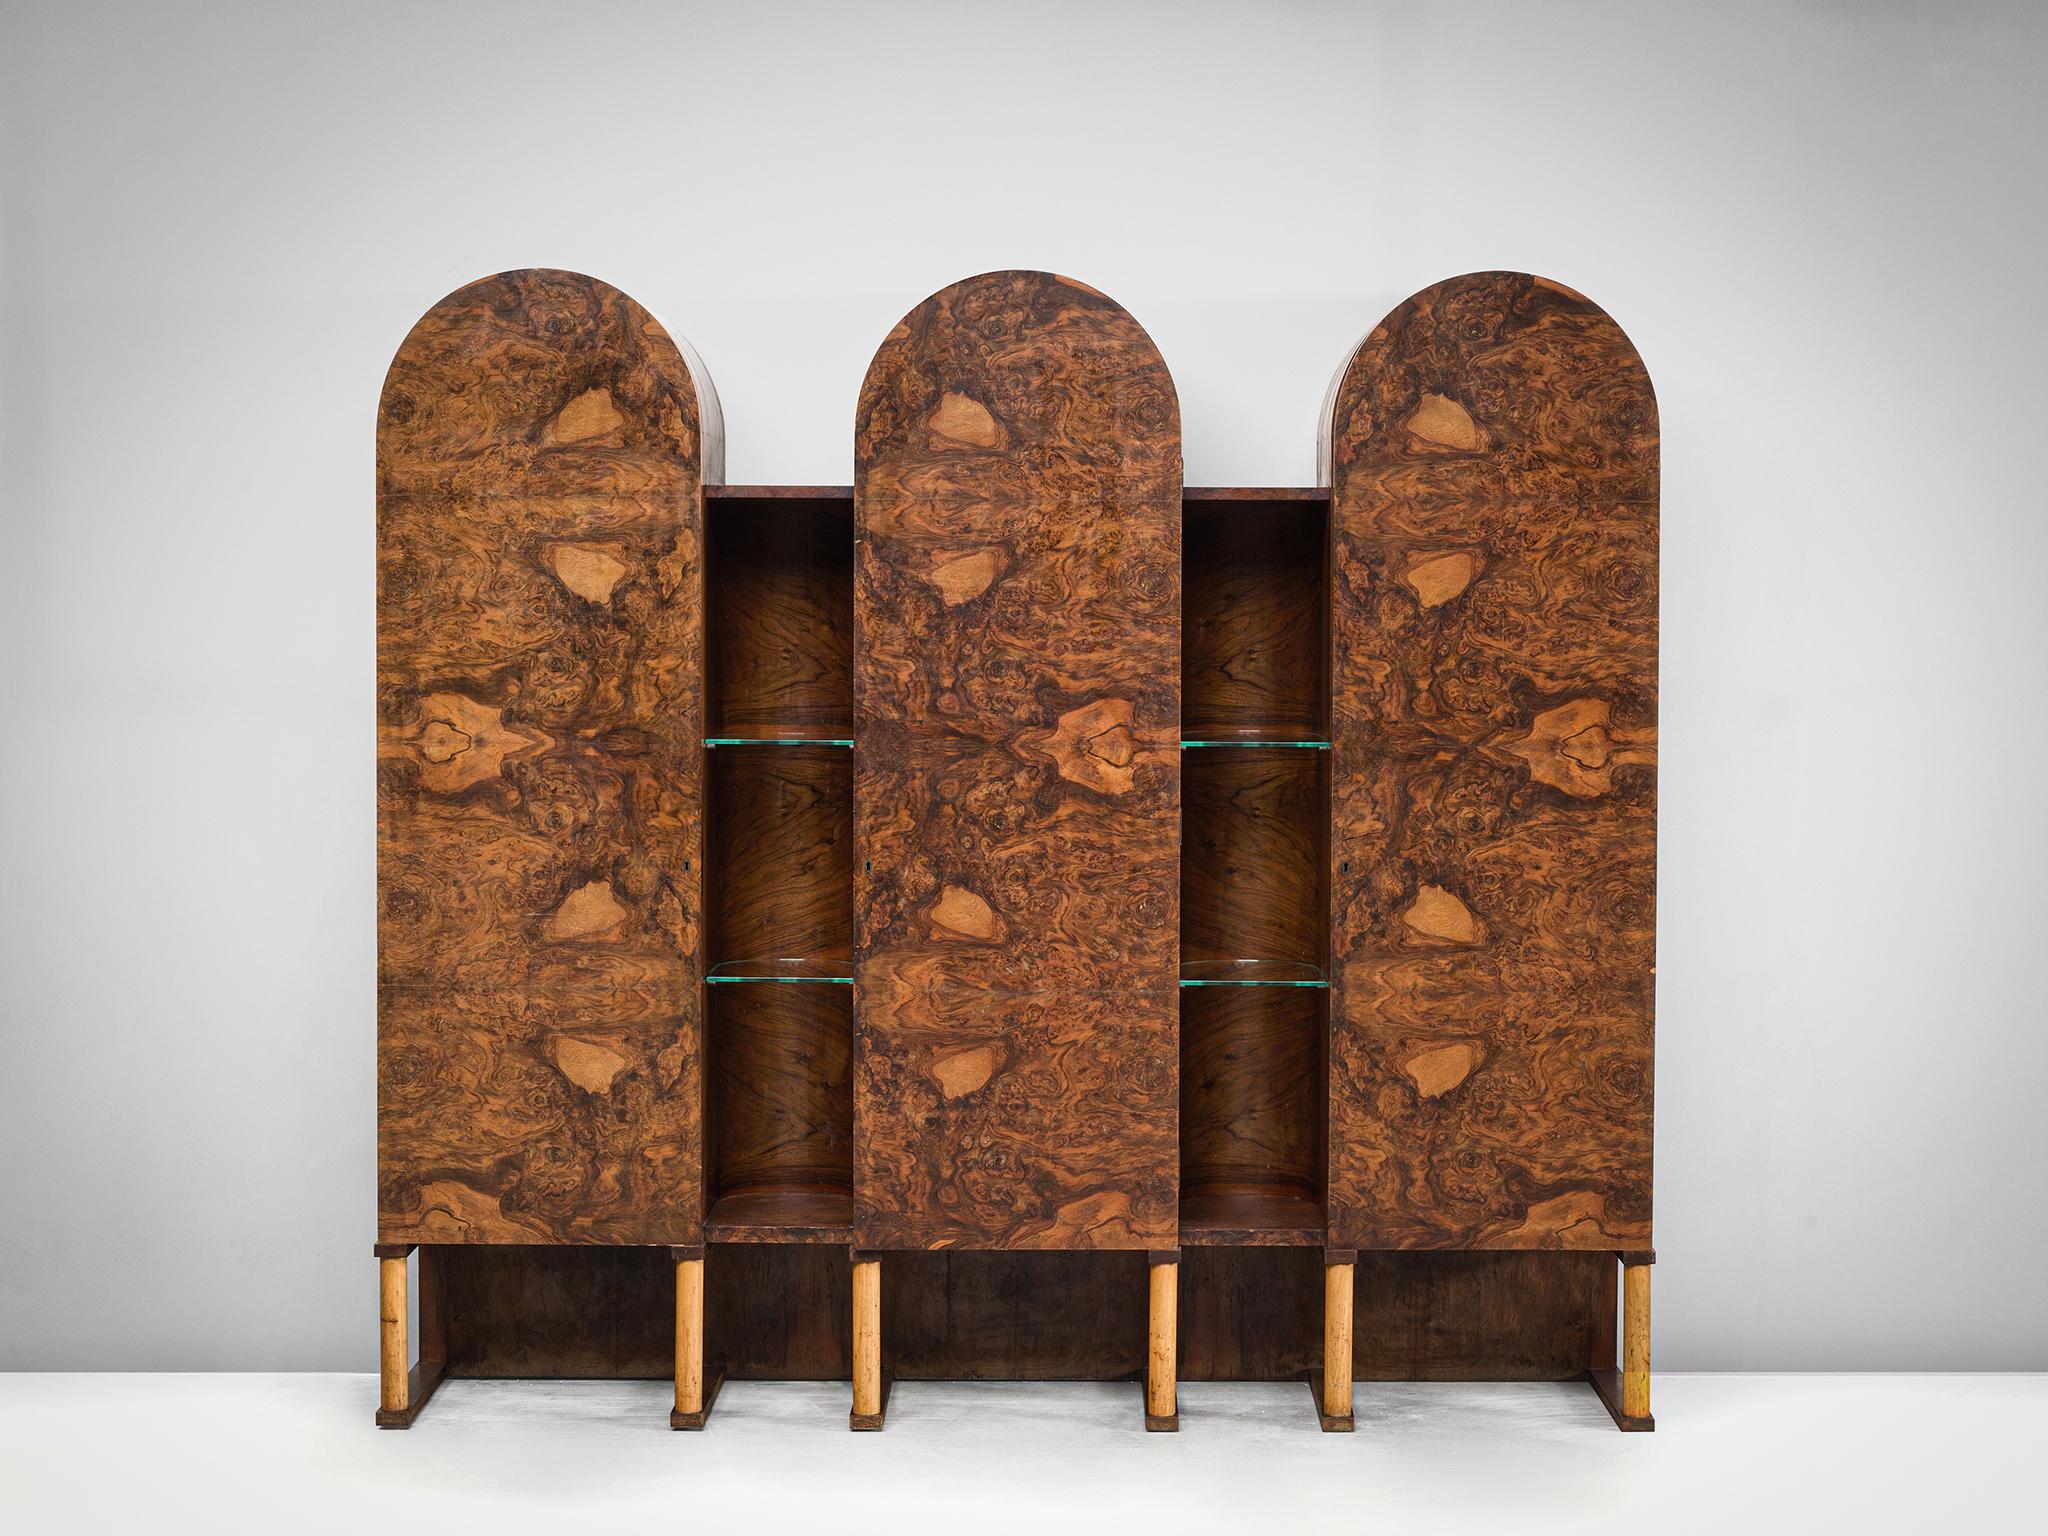 Cabinet, walnut burl, wood, glass, Italy, 1960s.

This sensuous cabinet is executed in walnut burl. The cabinet features three arches with three burl doors, and four shelves. In between the arches are open gaps with featuring two glass shelves. The